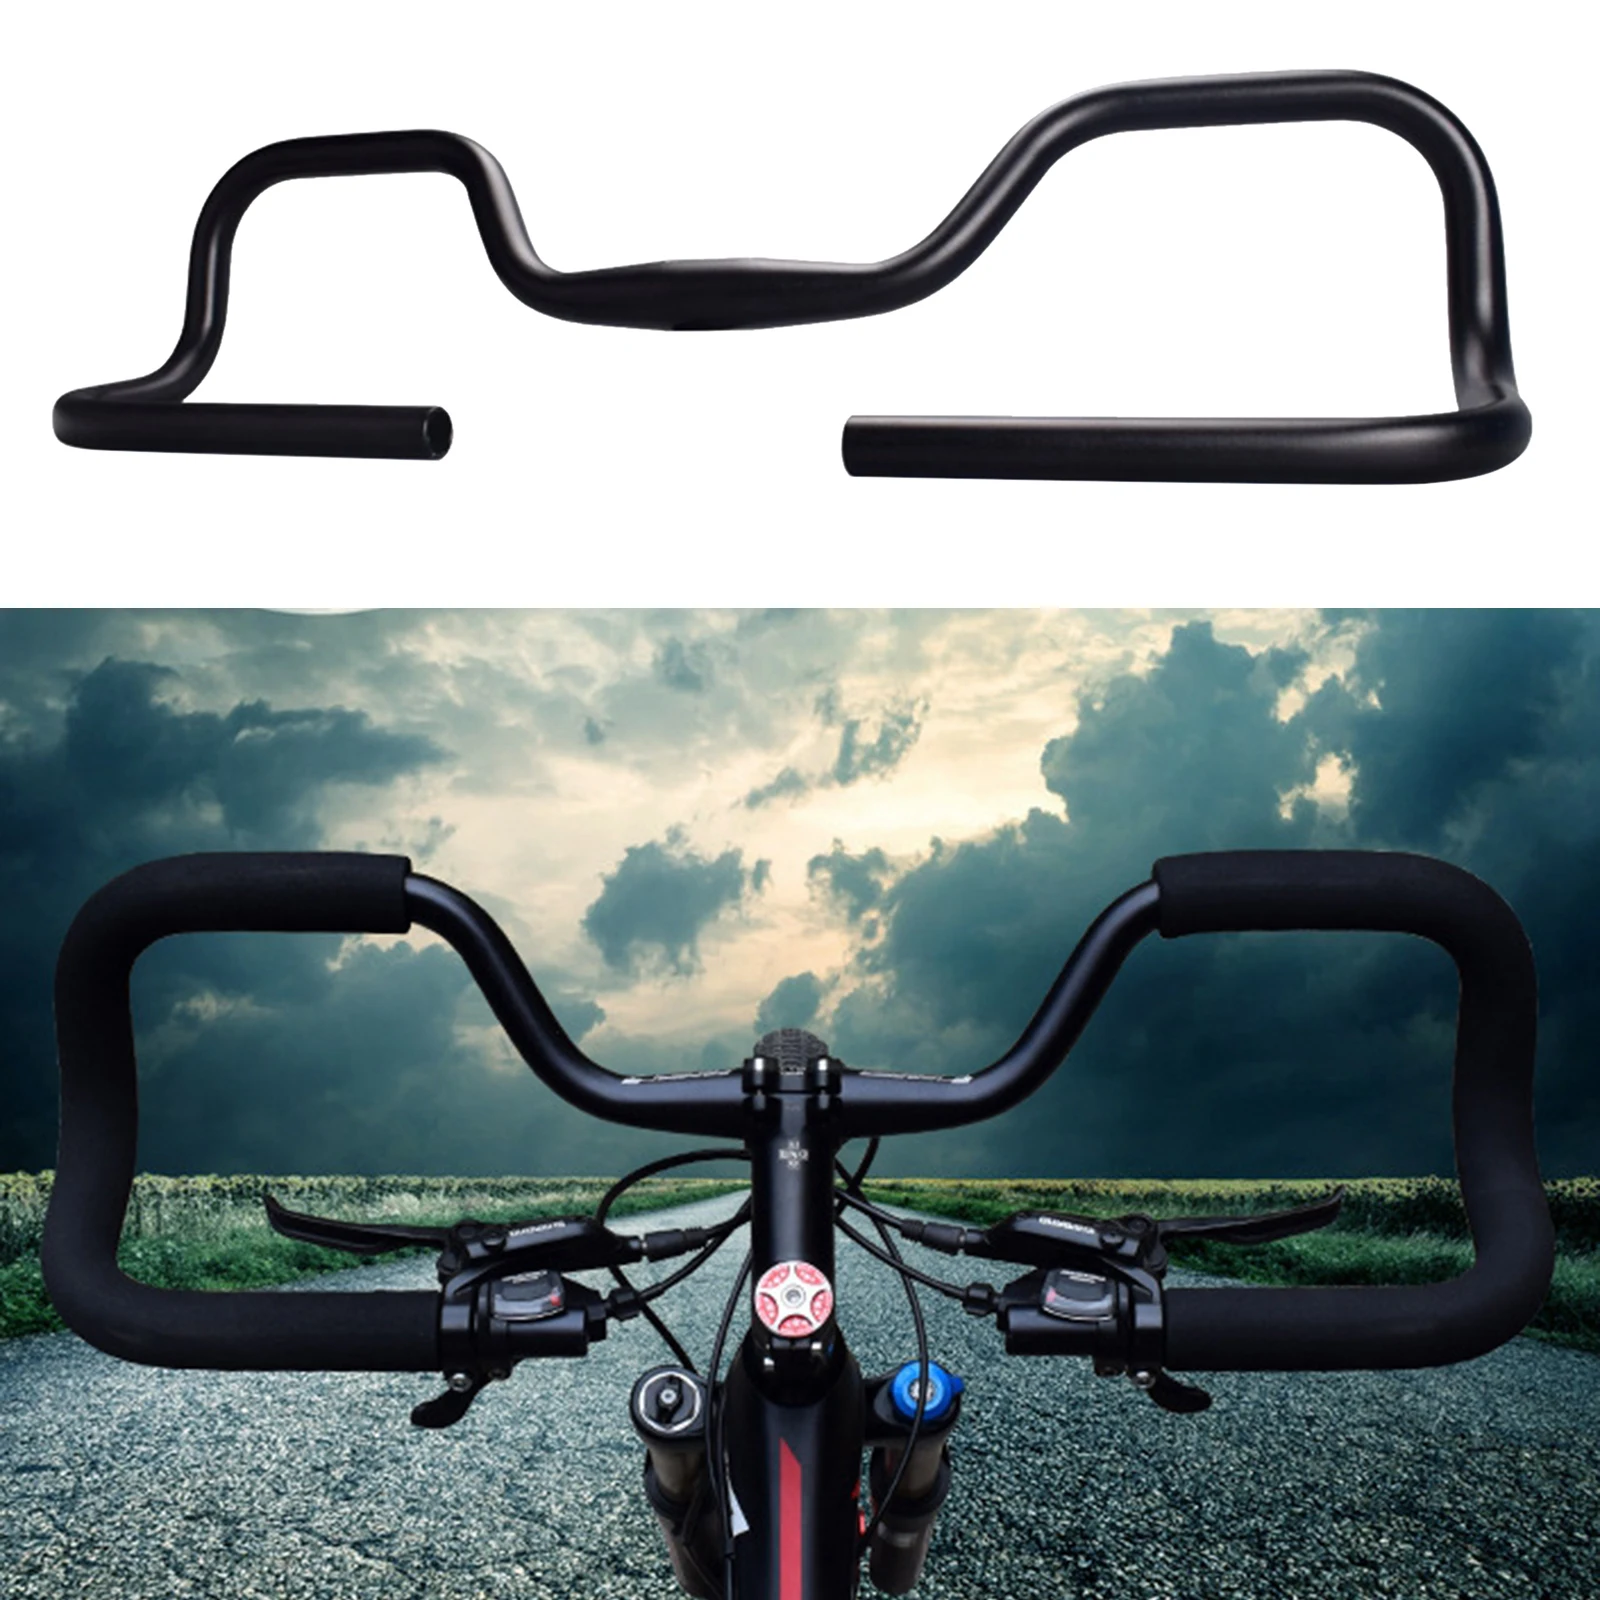 31.8mm Butterfly Aluminium Alloy Mulit-Position Handle Bar Bike Cycle Bicycle 